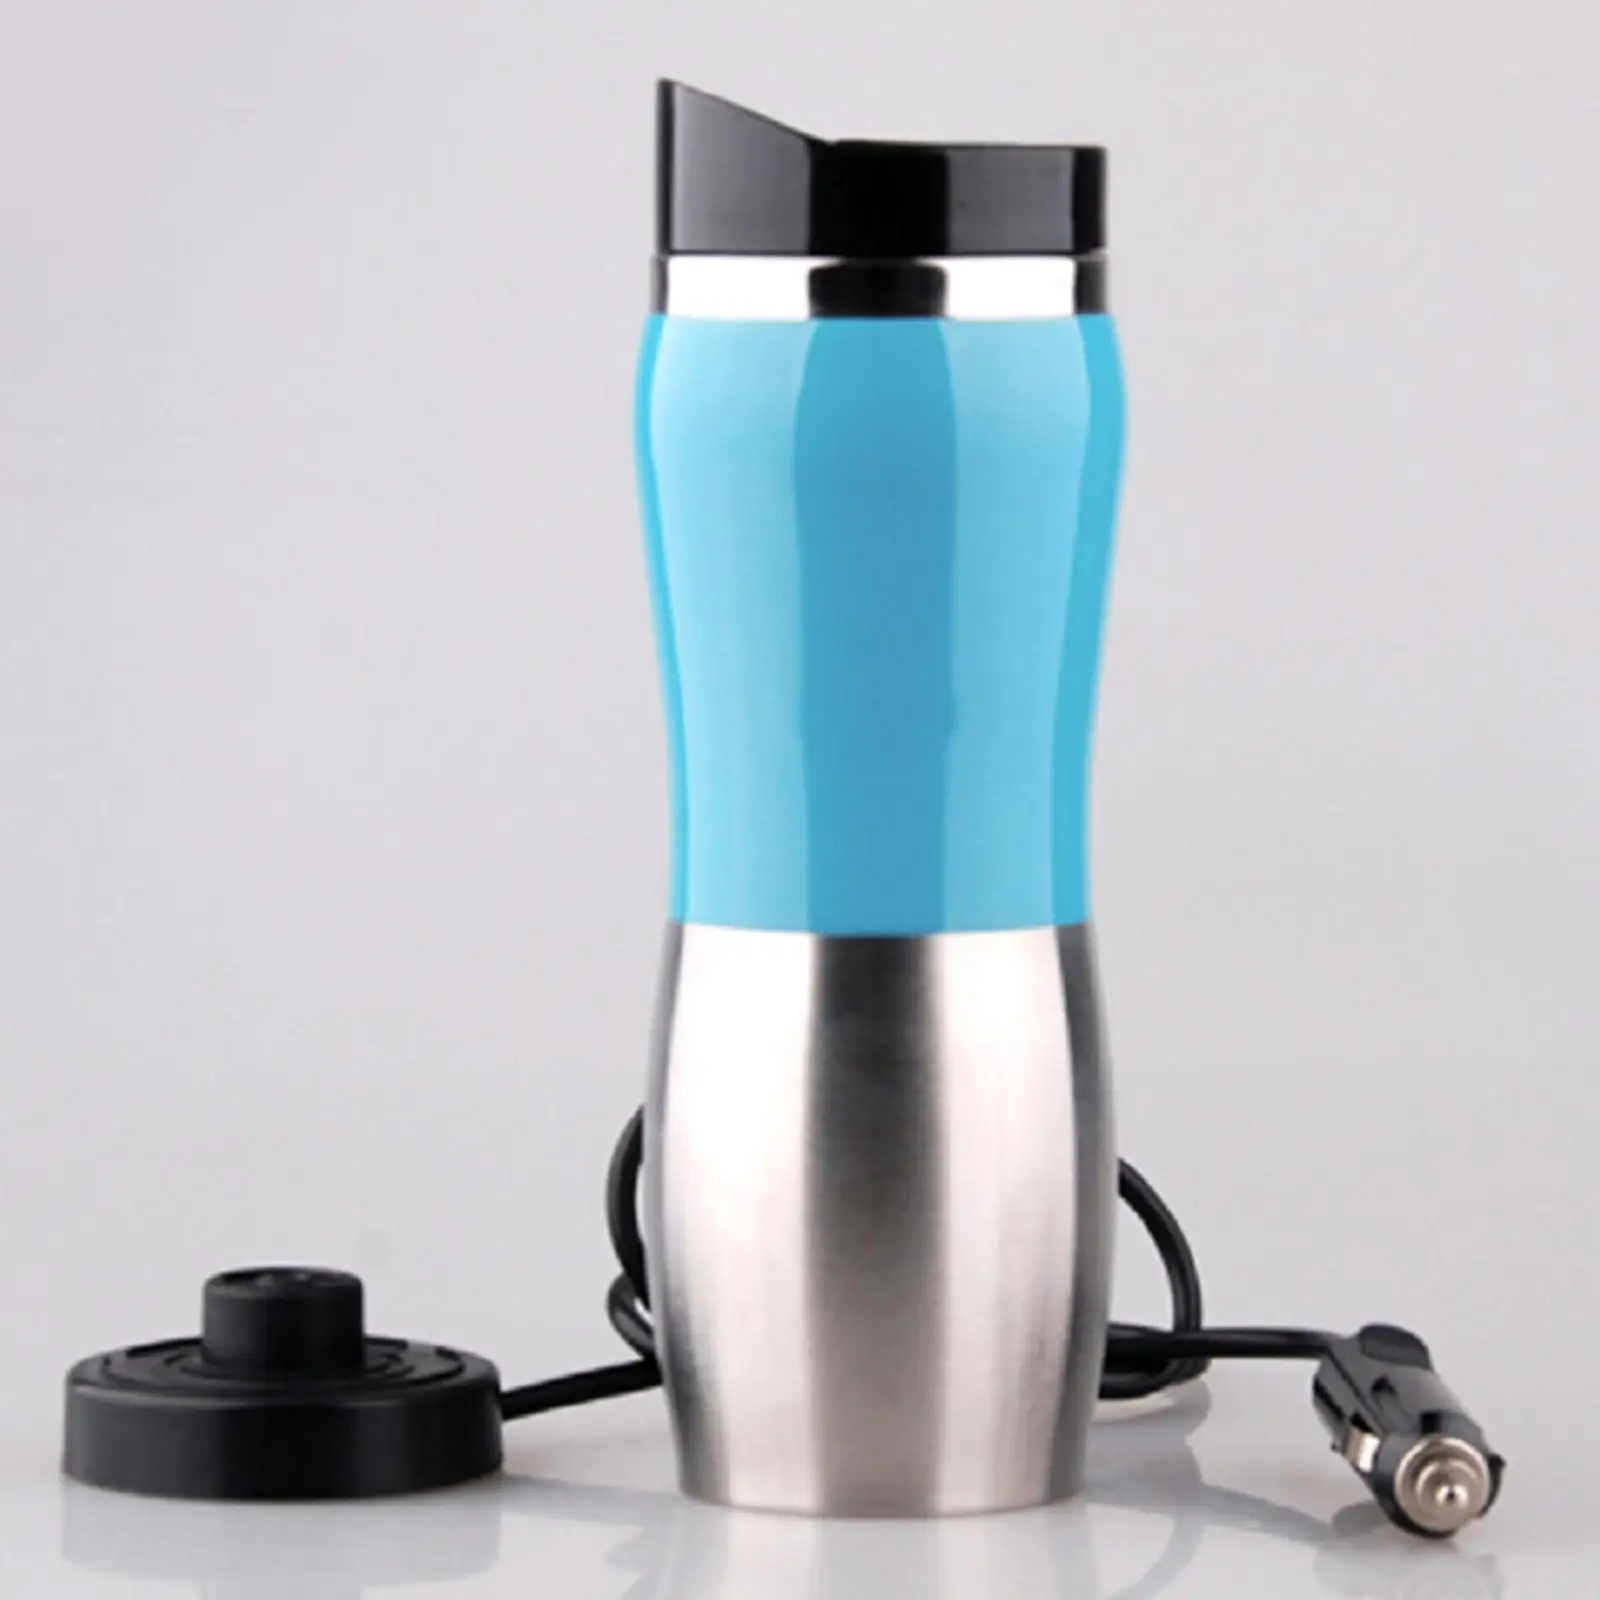 Car Electric Kettle 24V 400ml in Car Stainless Steel Travel Heating Cup Car Water Heater Mug for Tea Camping Boat Hot Water Eggs